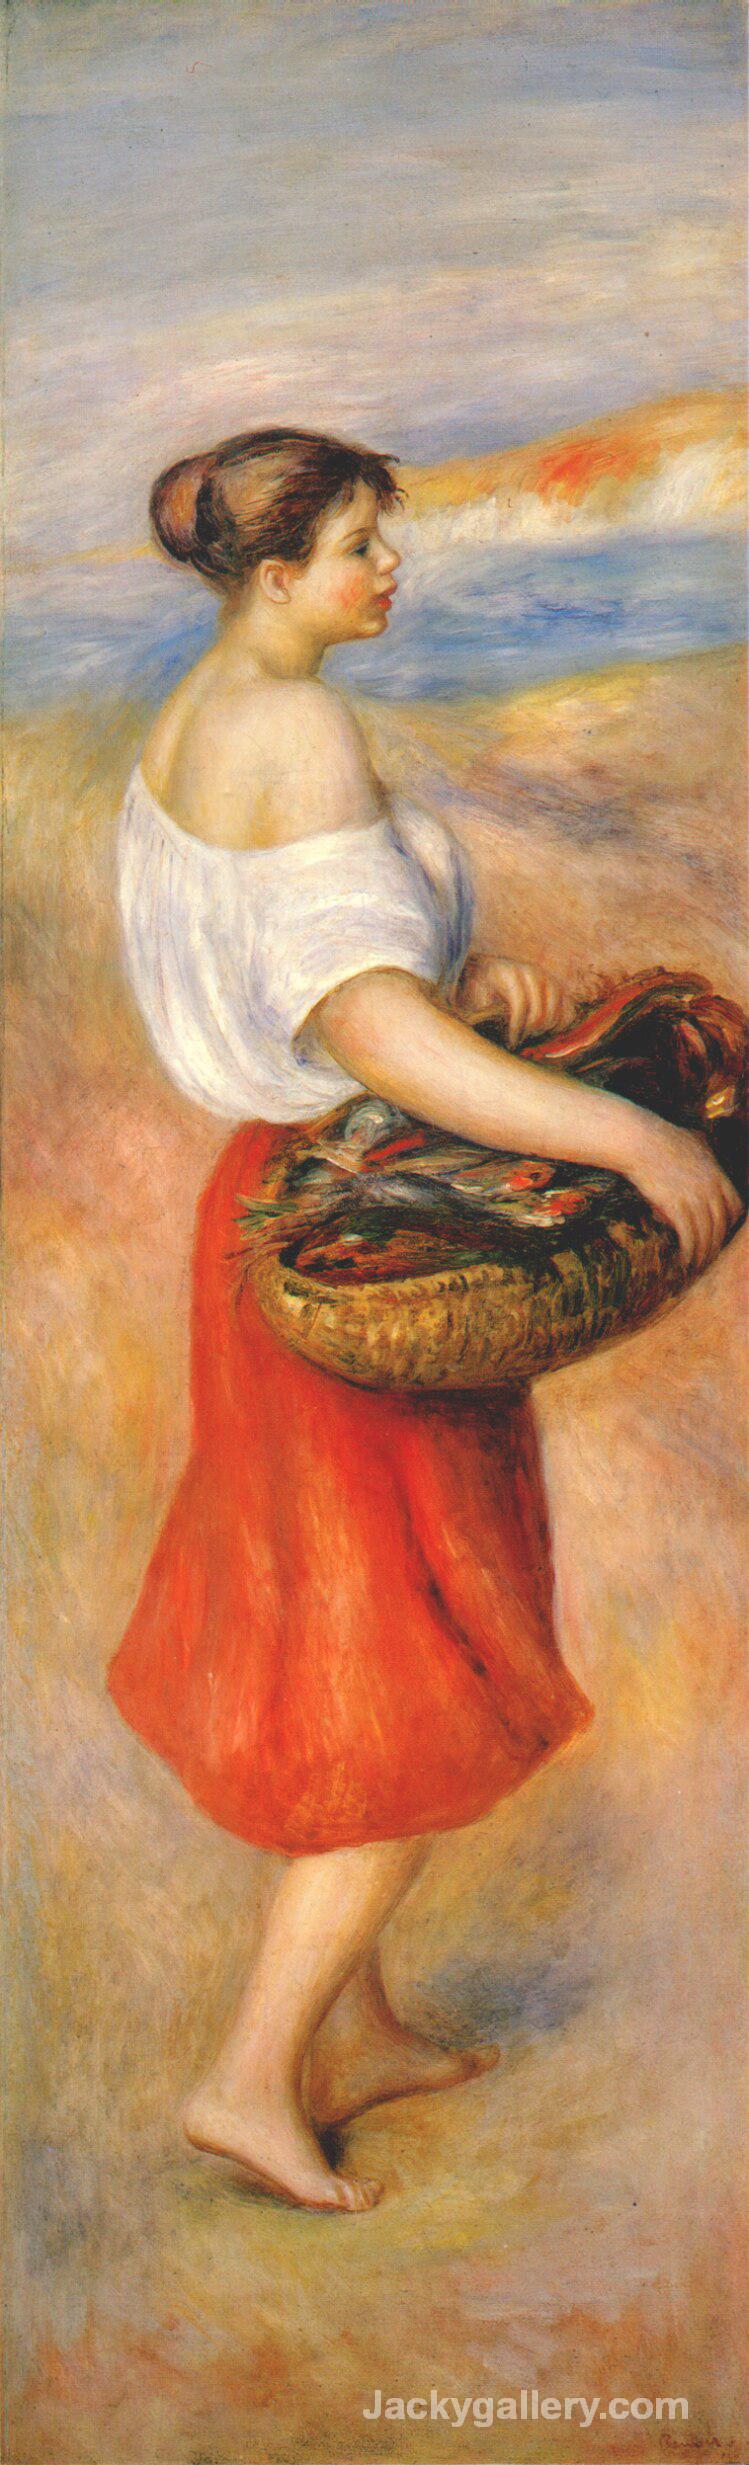 Girl with a basket of fish by Pierre Auguste Renoir paintings reproduction